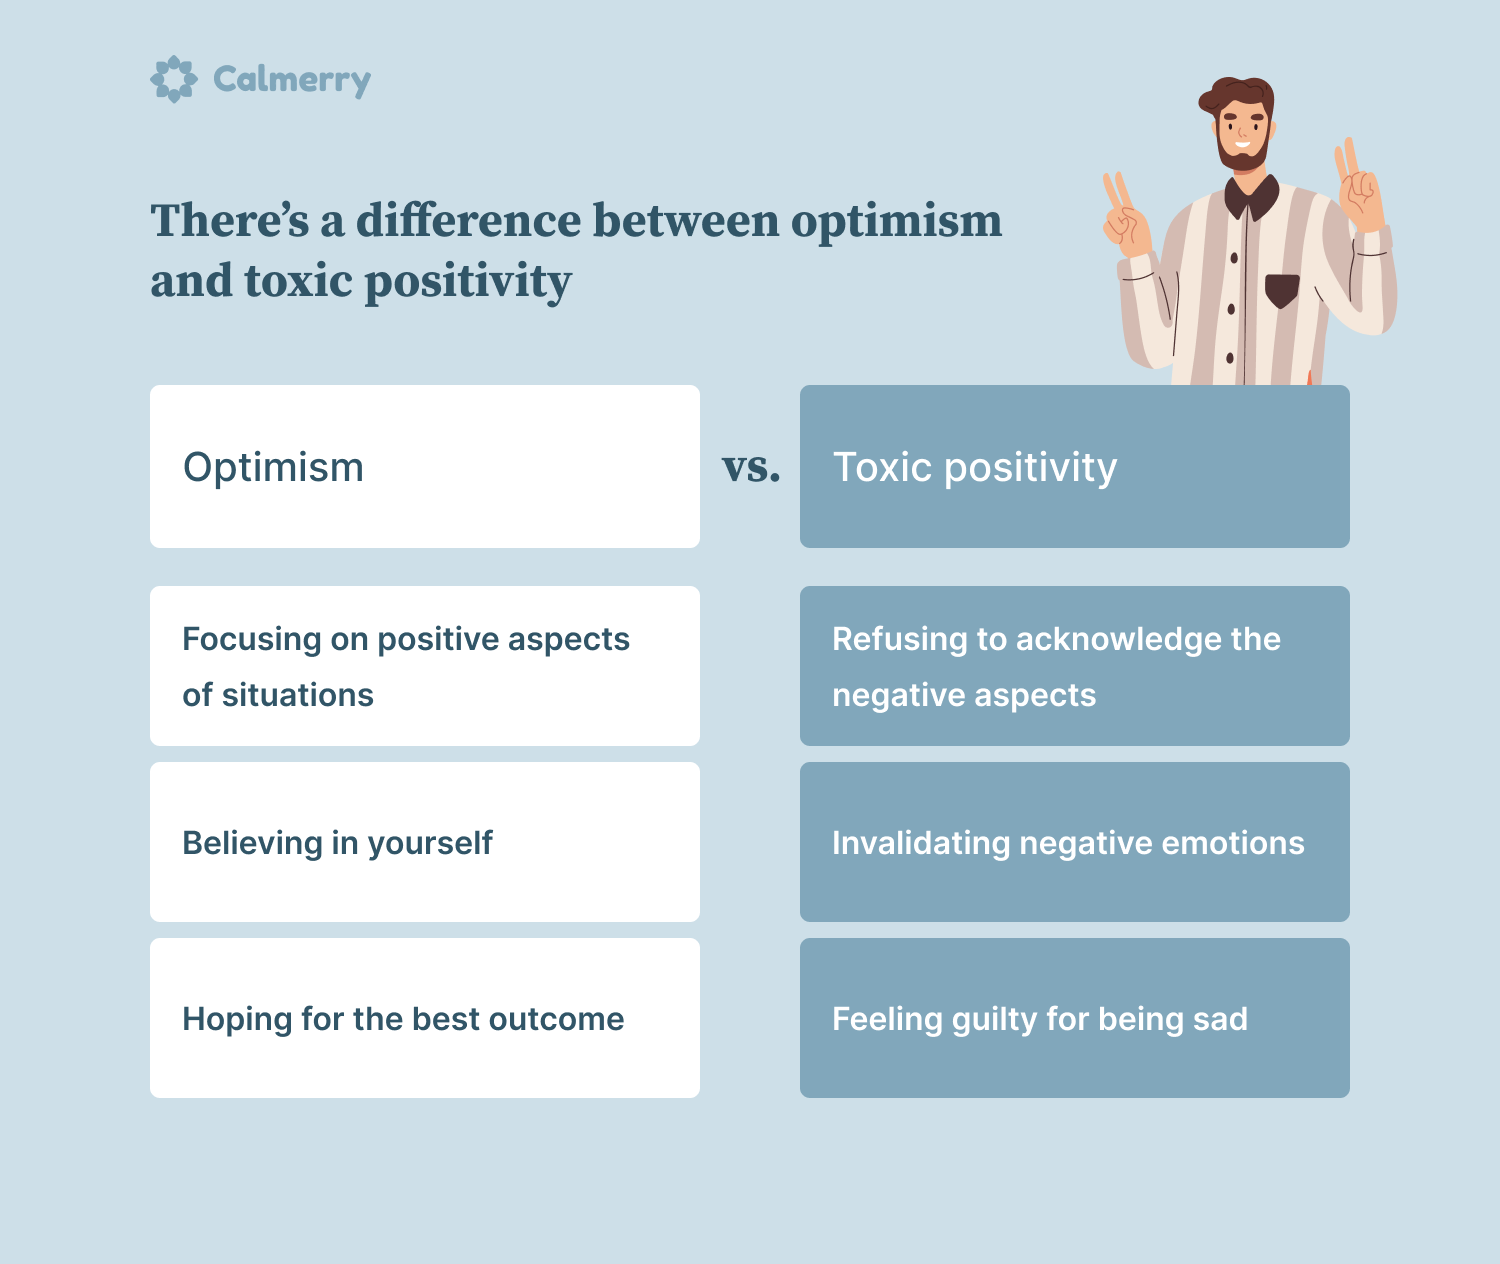 There’s a difference between optimism and toxic positivity